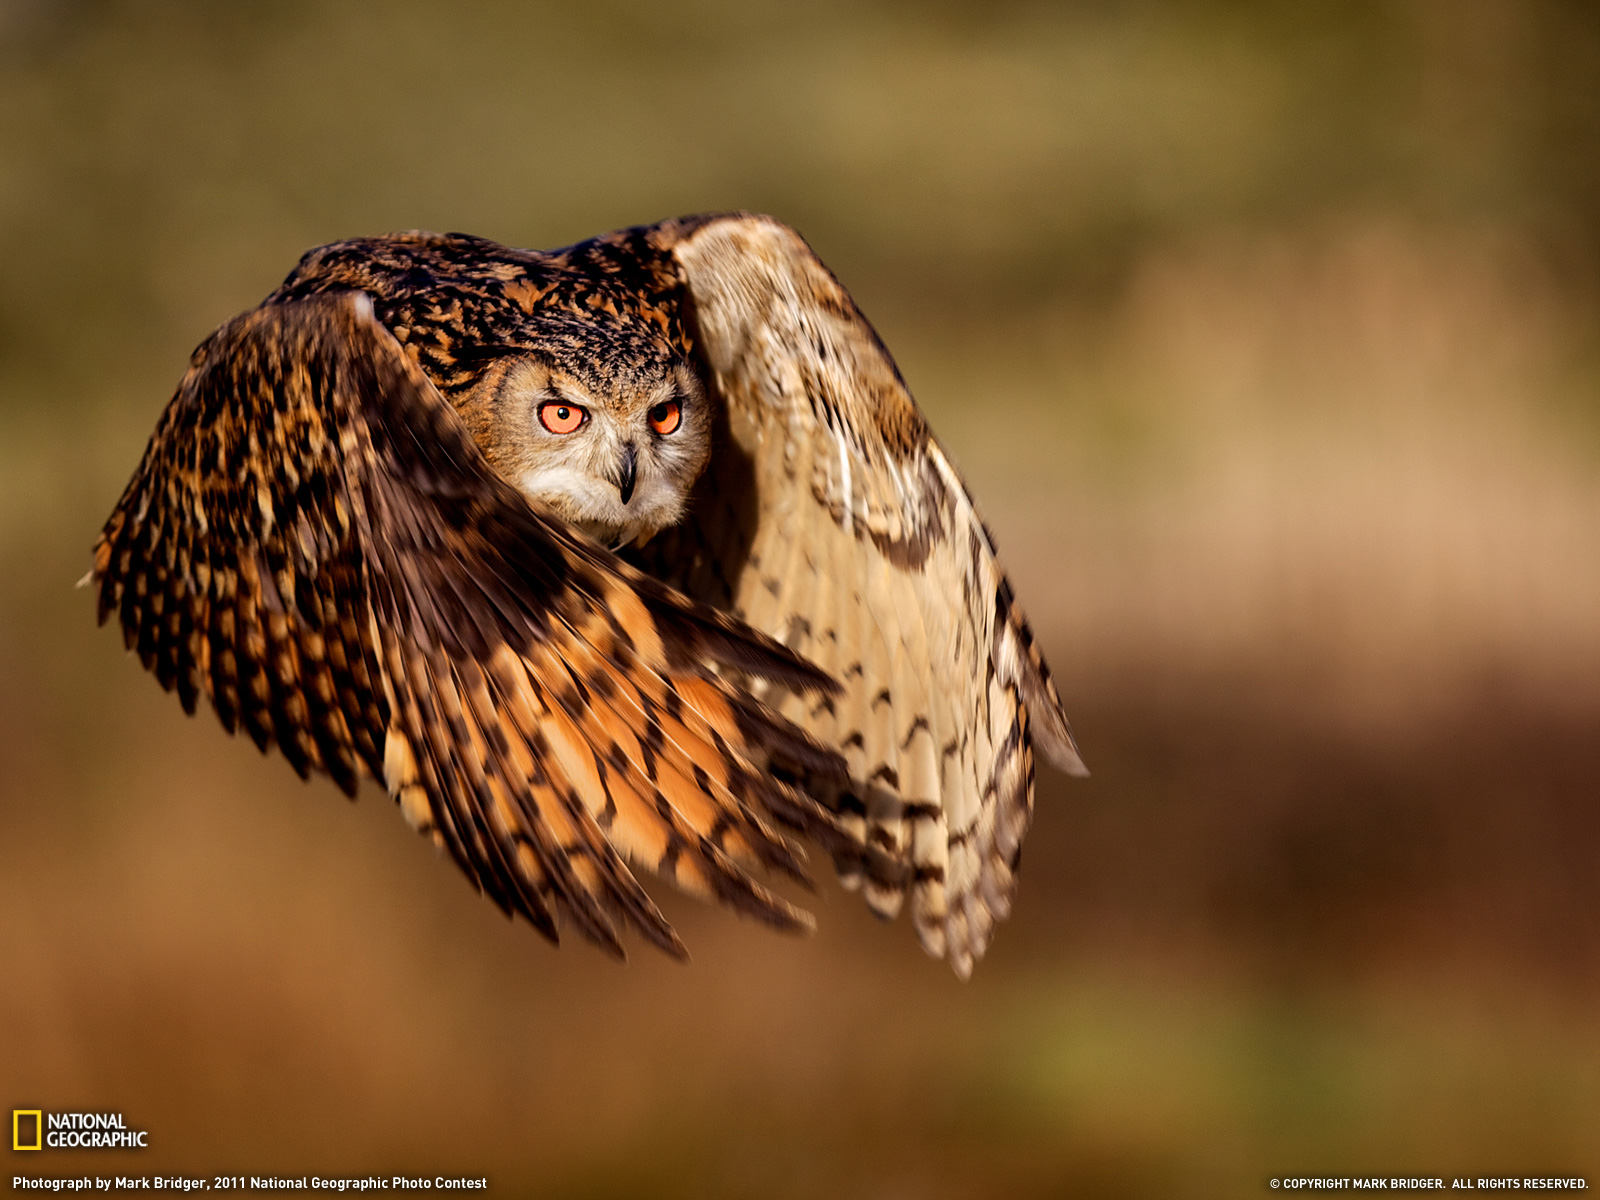 Eagle Owl Picture Bird Wallpaper National Geographic Photo Of